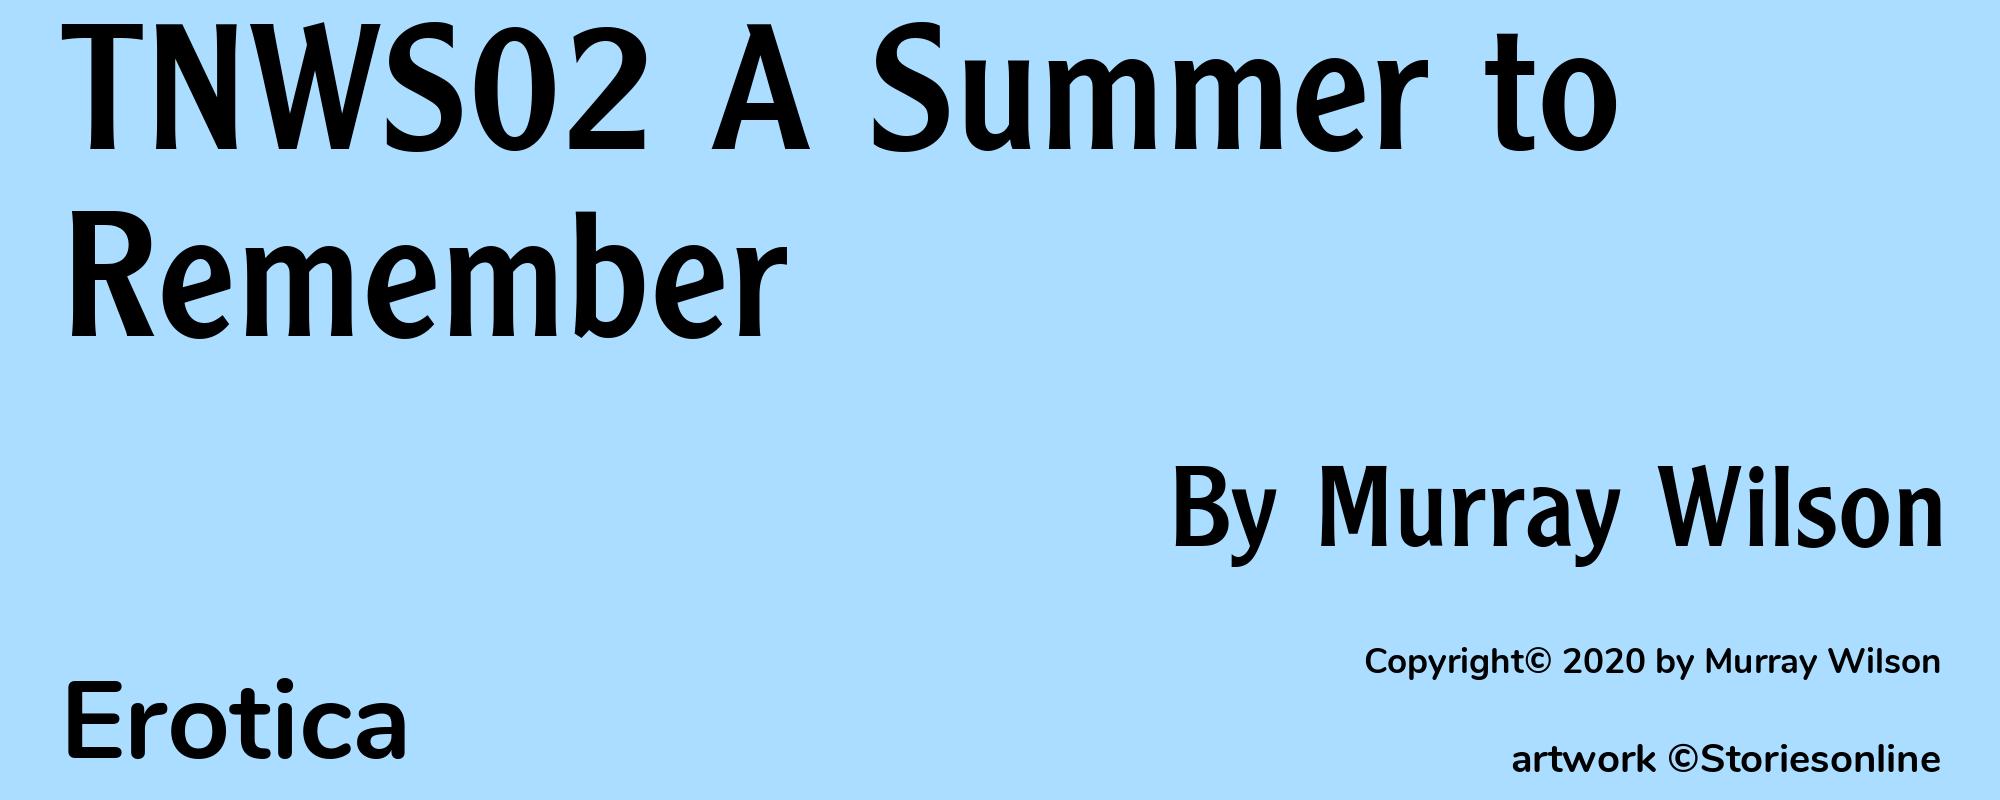 TNWS02 A Summer to Remember - Cover